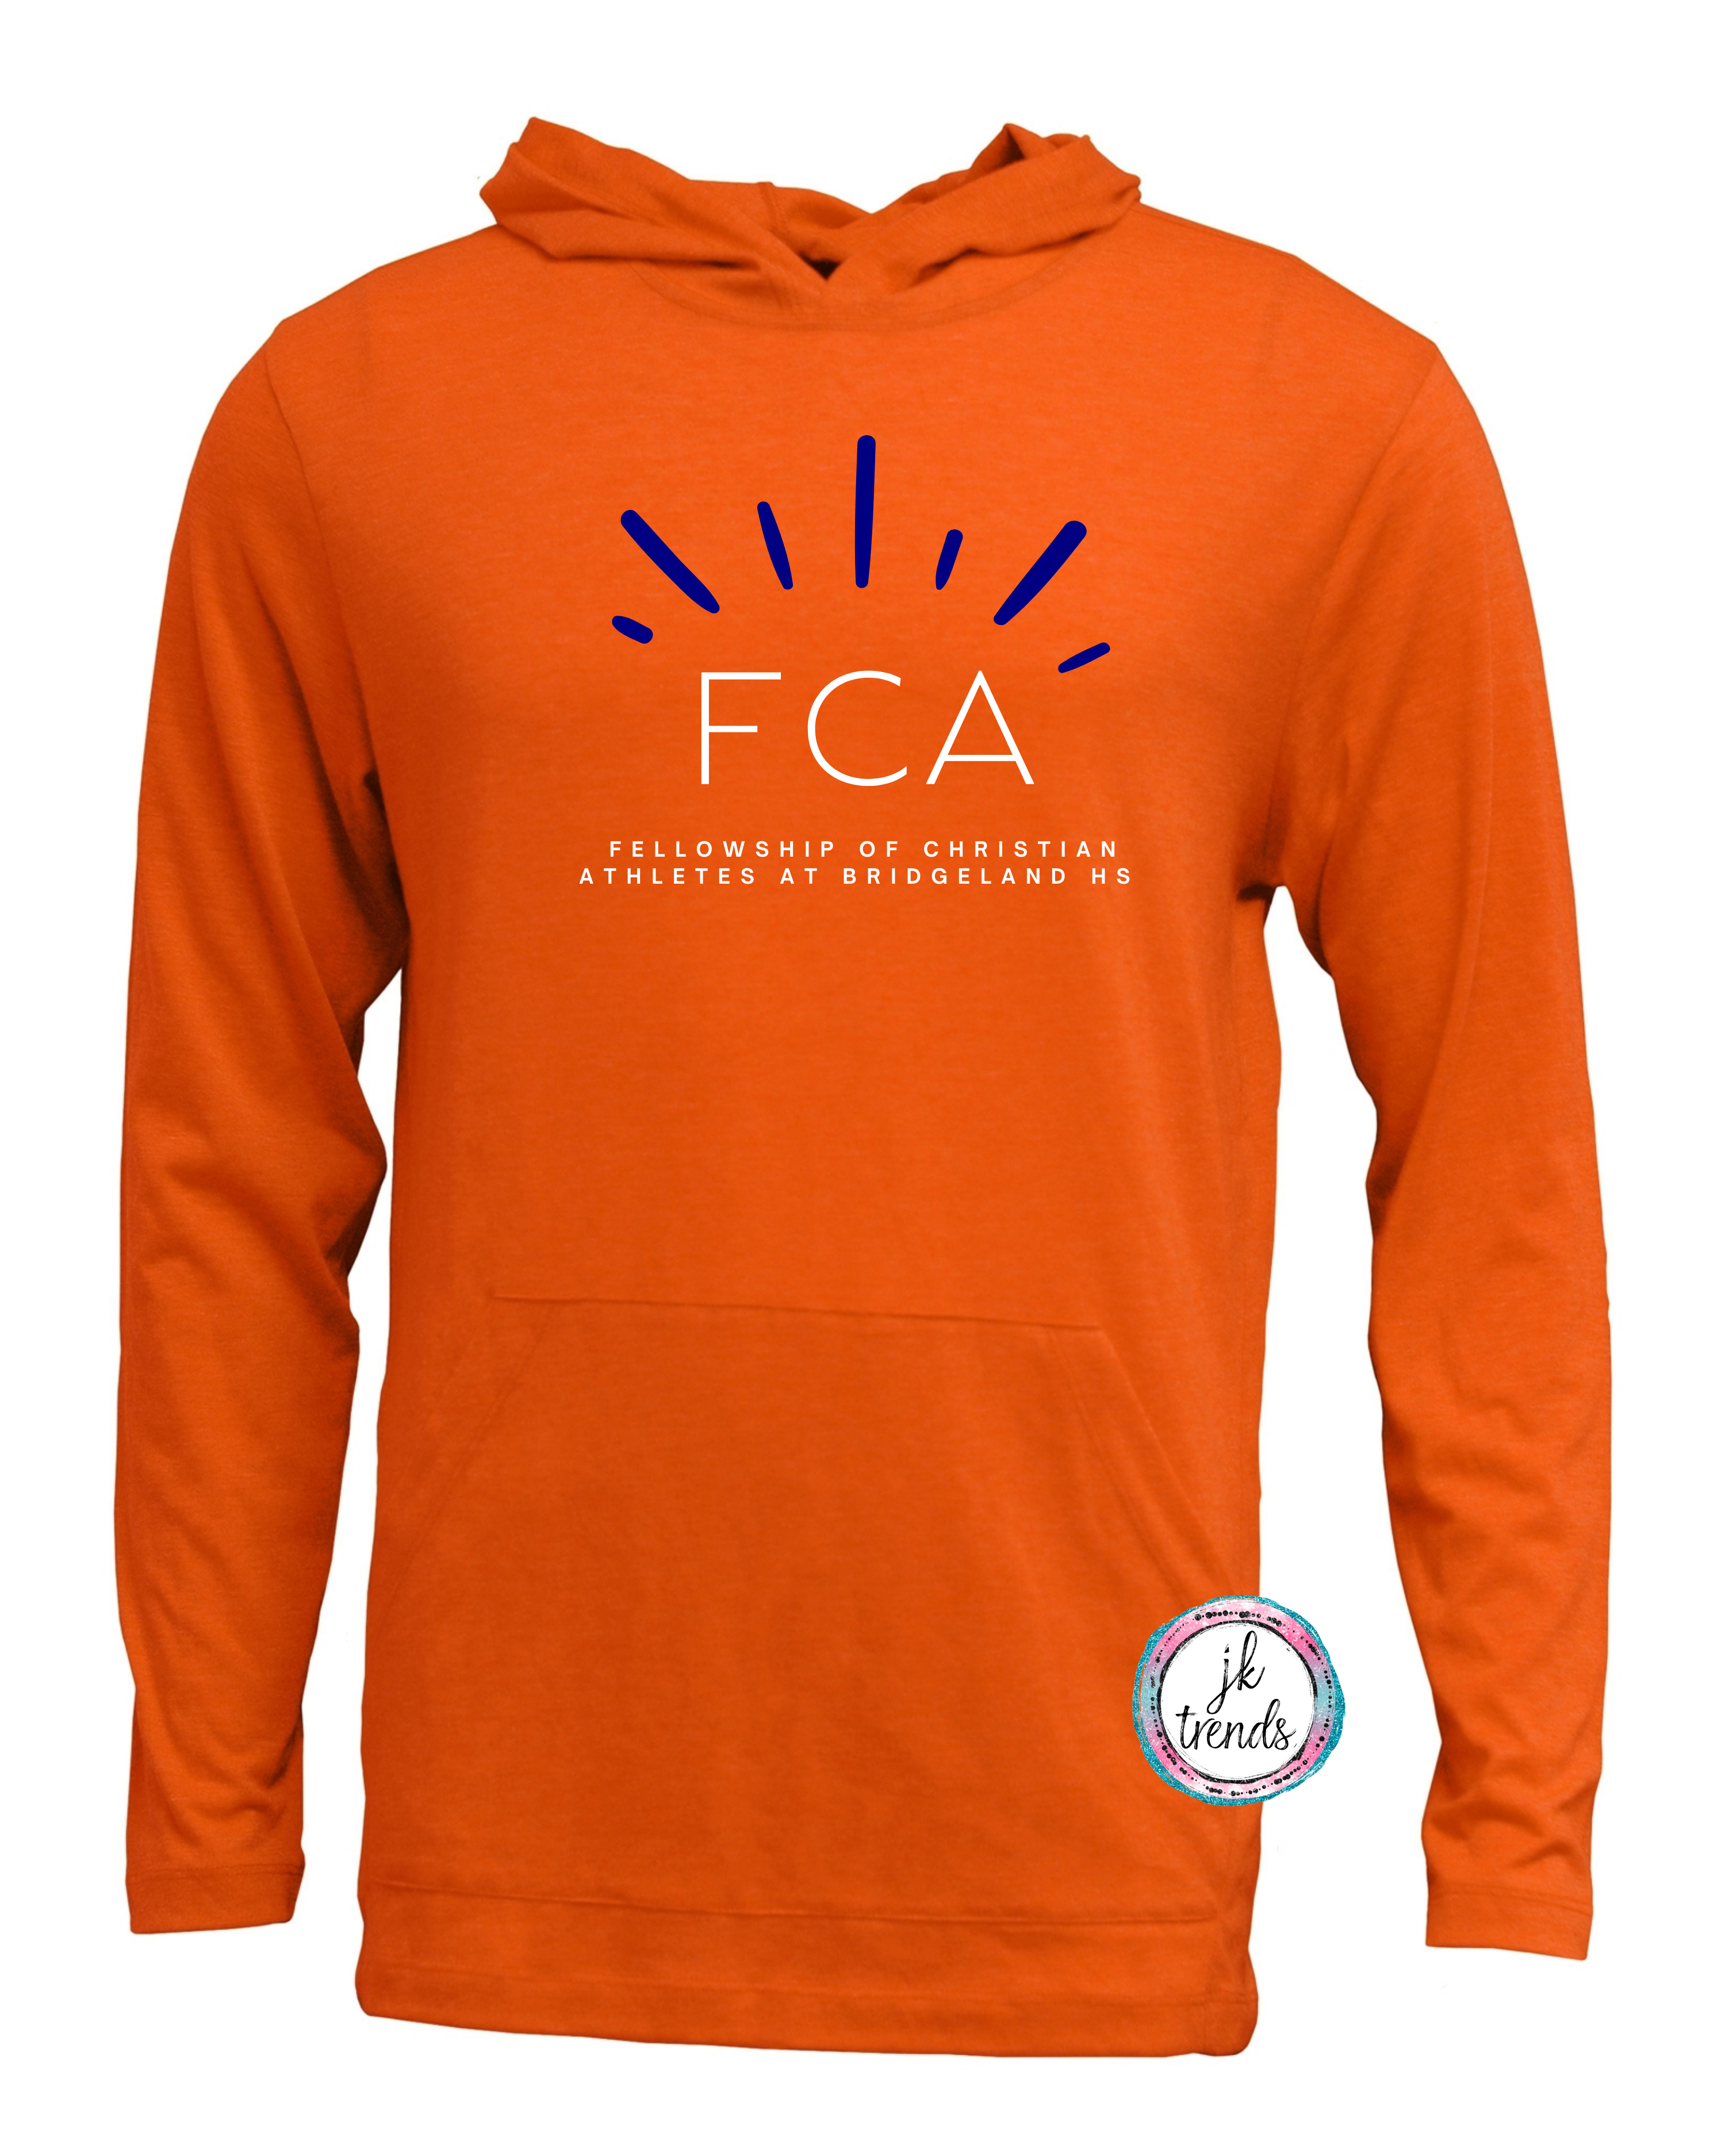 FCA Rise Cotton Long Sleeve Hooded Shirt